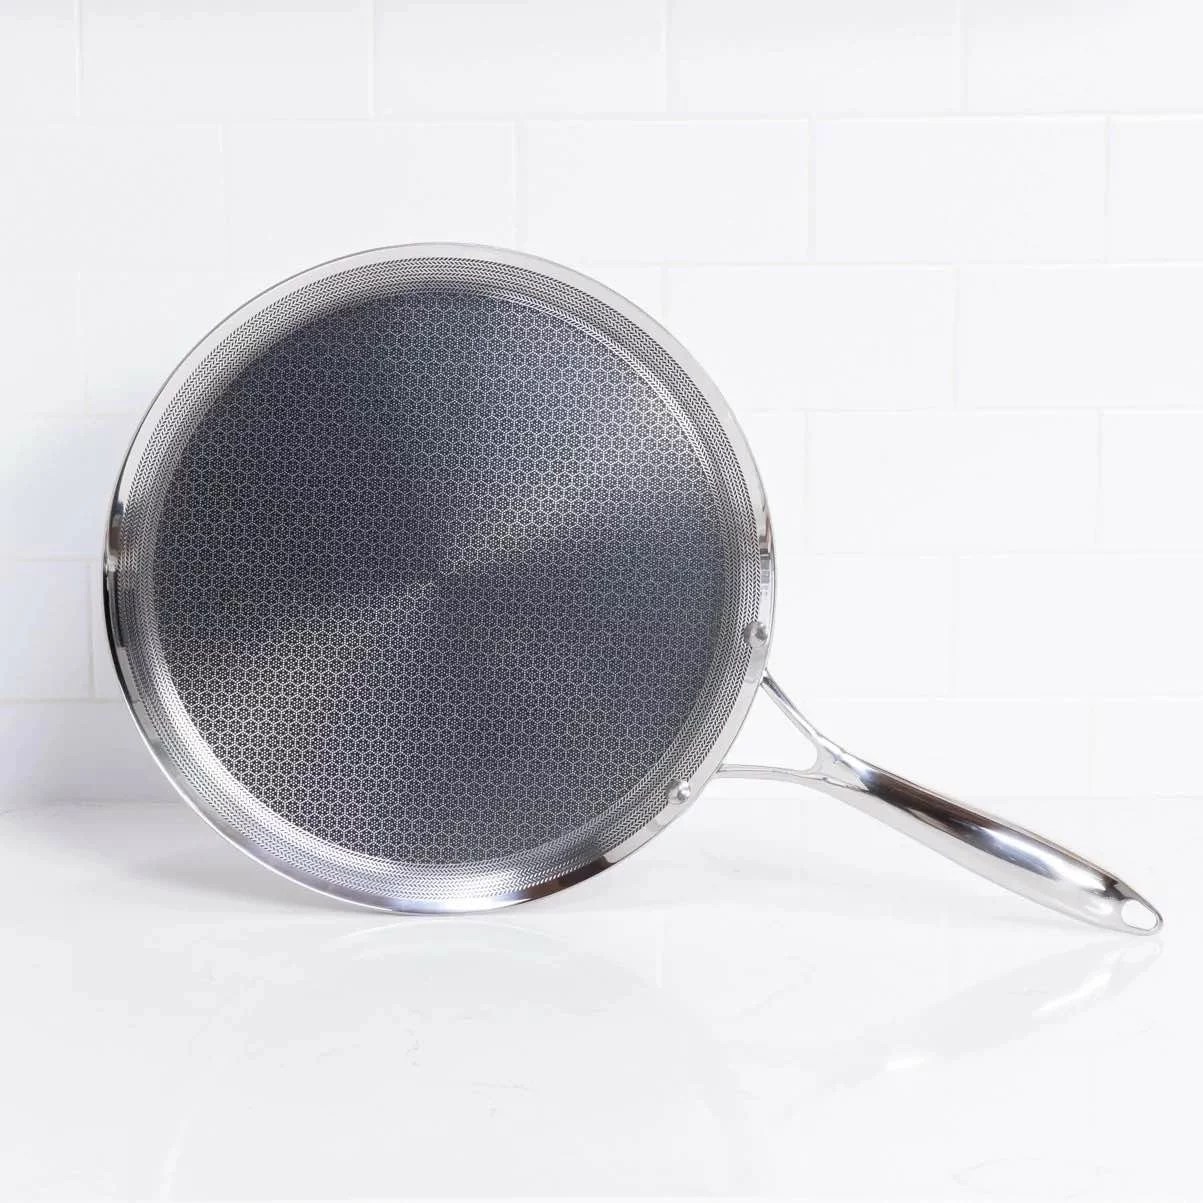 Oprah and Gordon Ramsay adore this hybrid cookware that's over 30